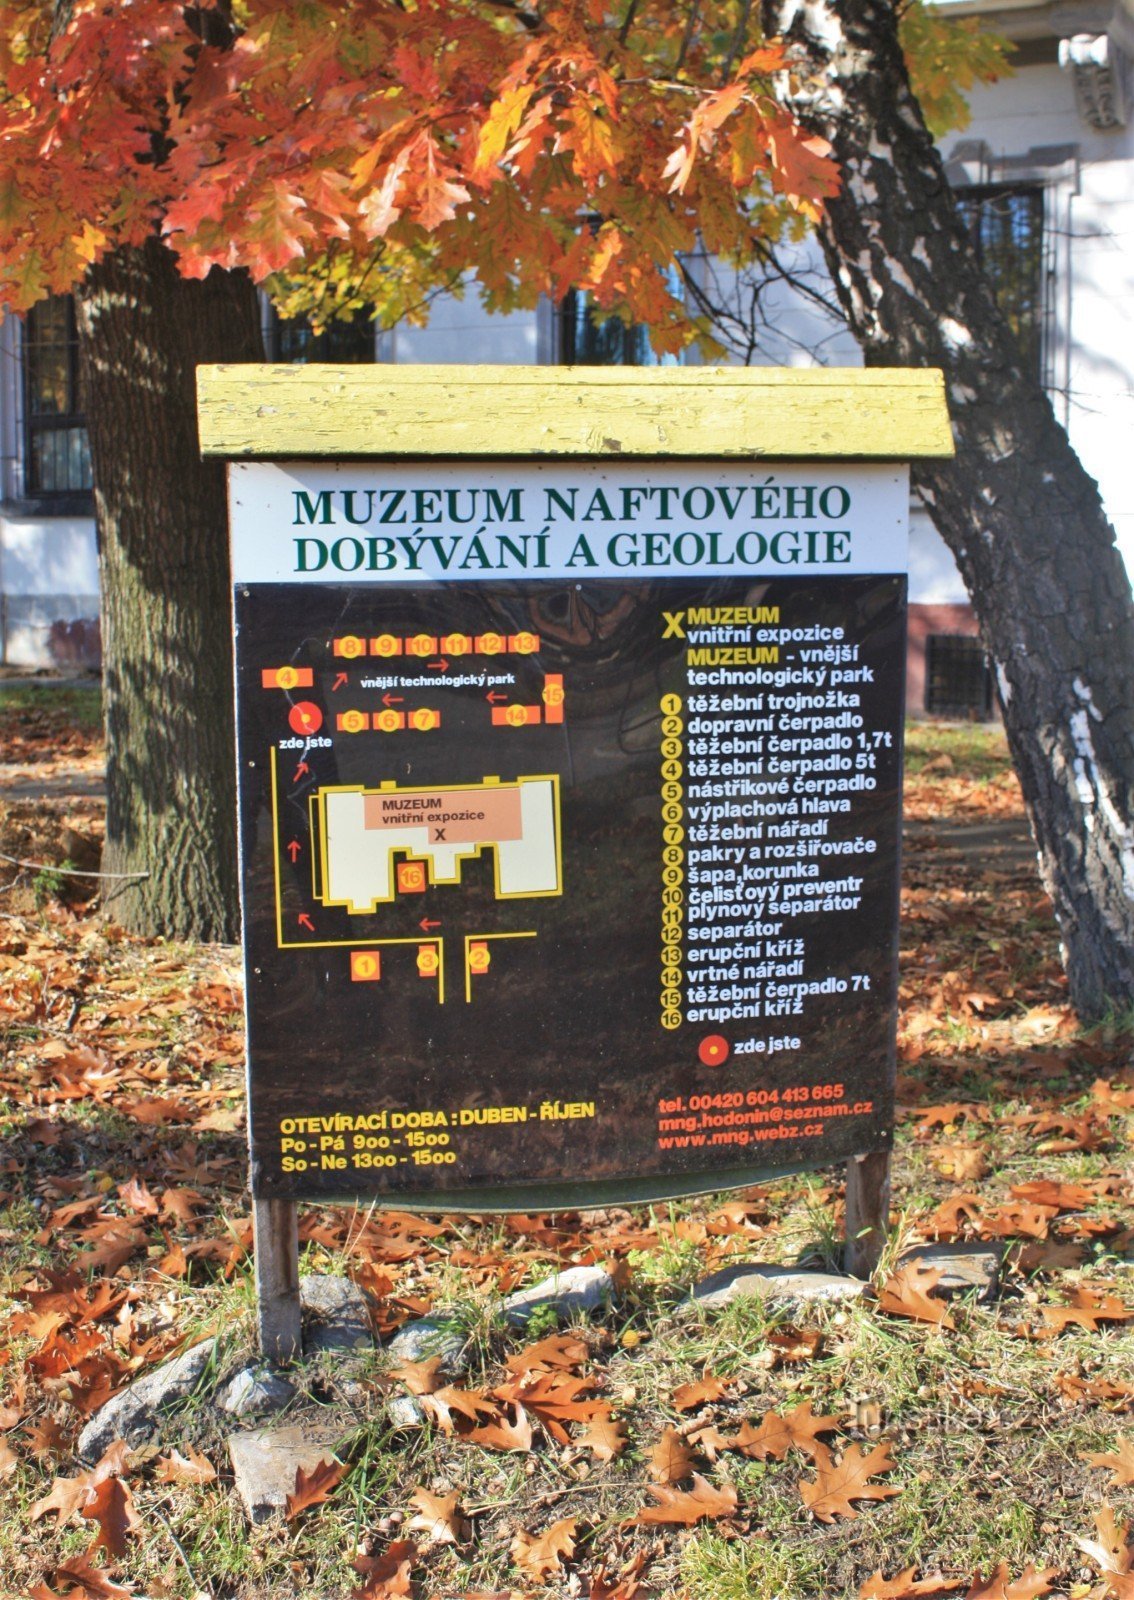 Information board before entering the museum